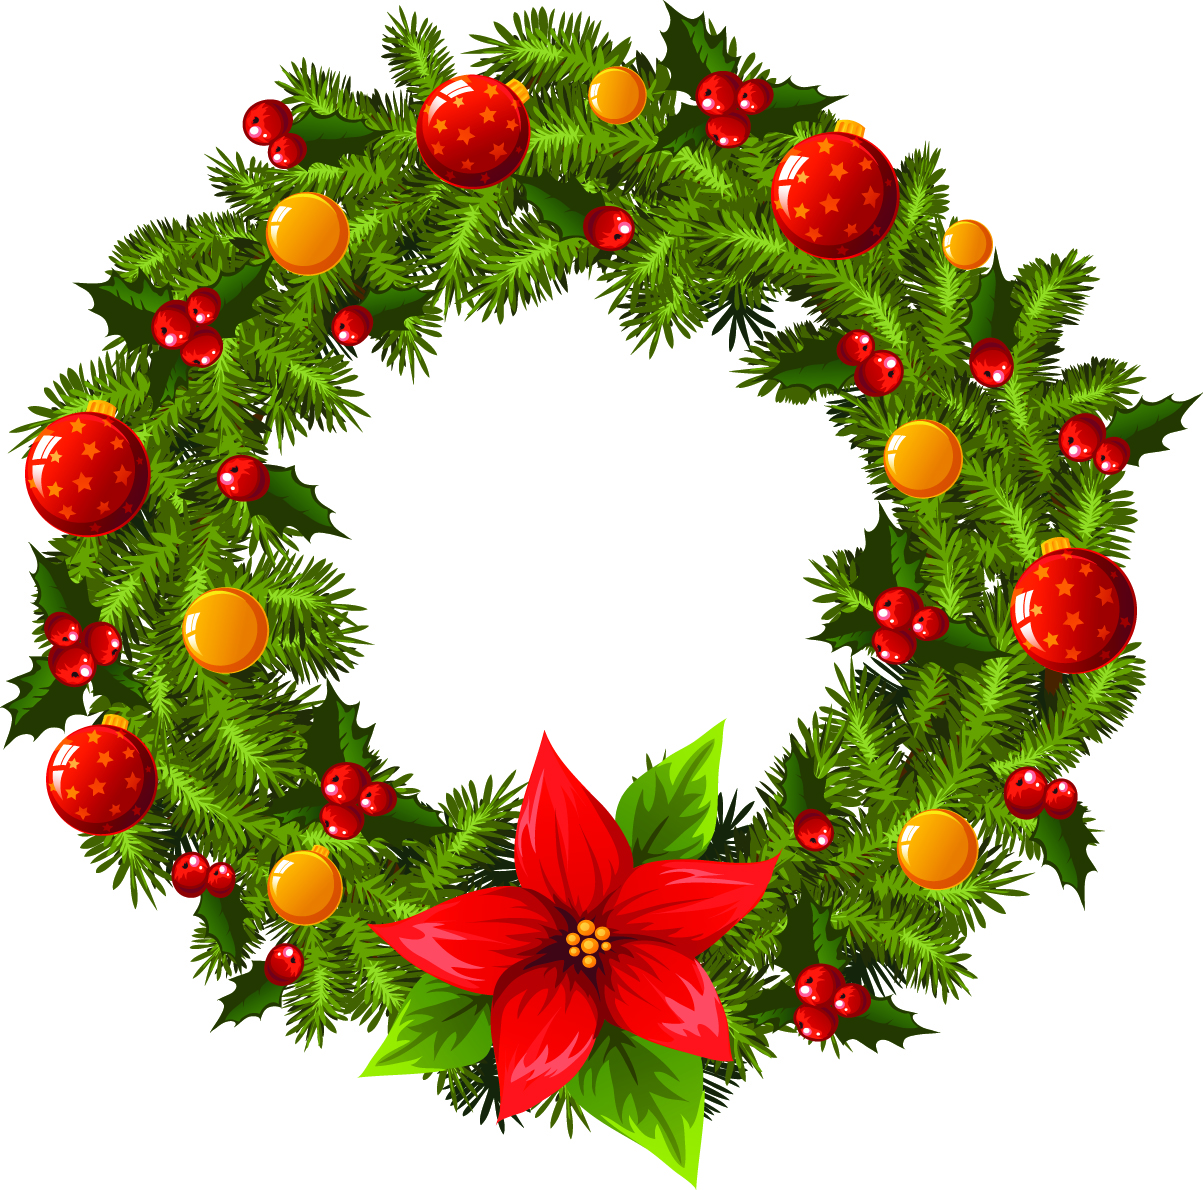 17 Free Wreath Vector Images